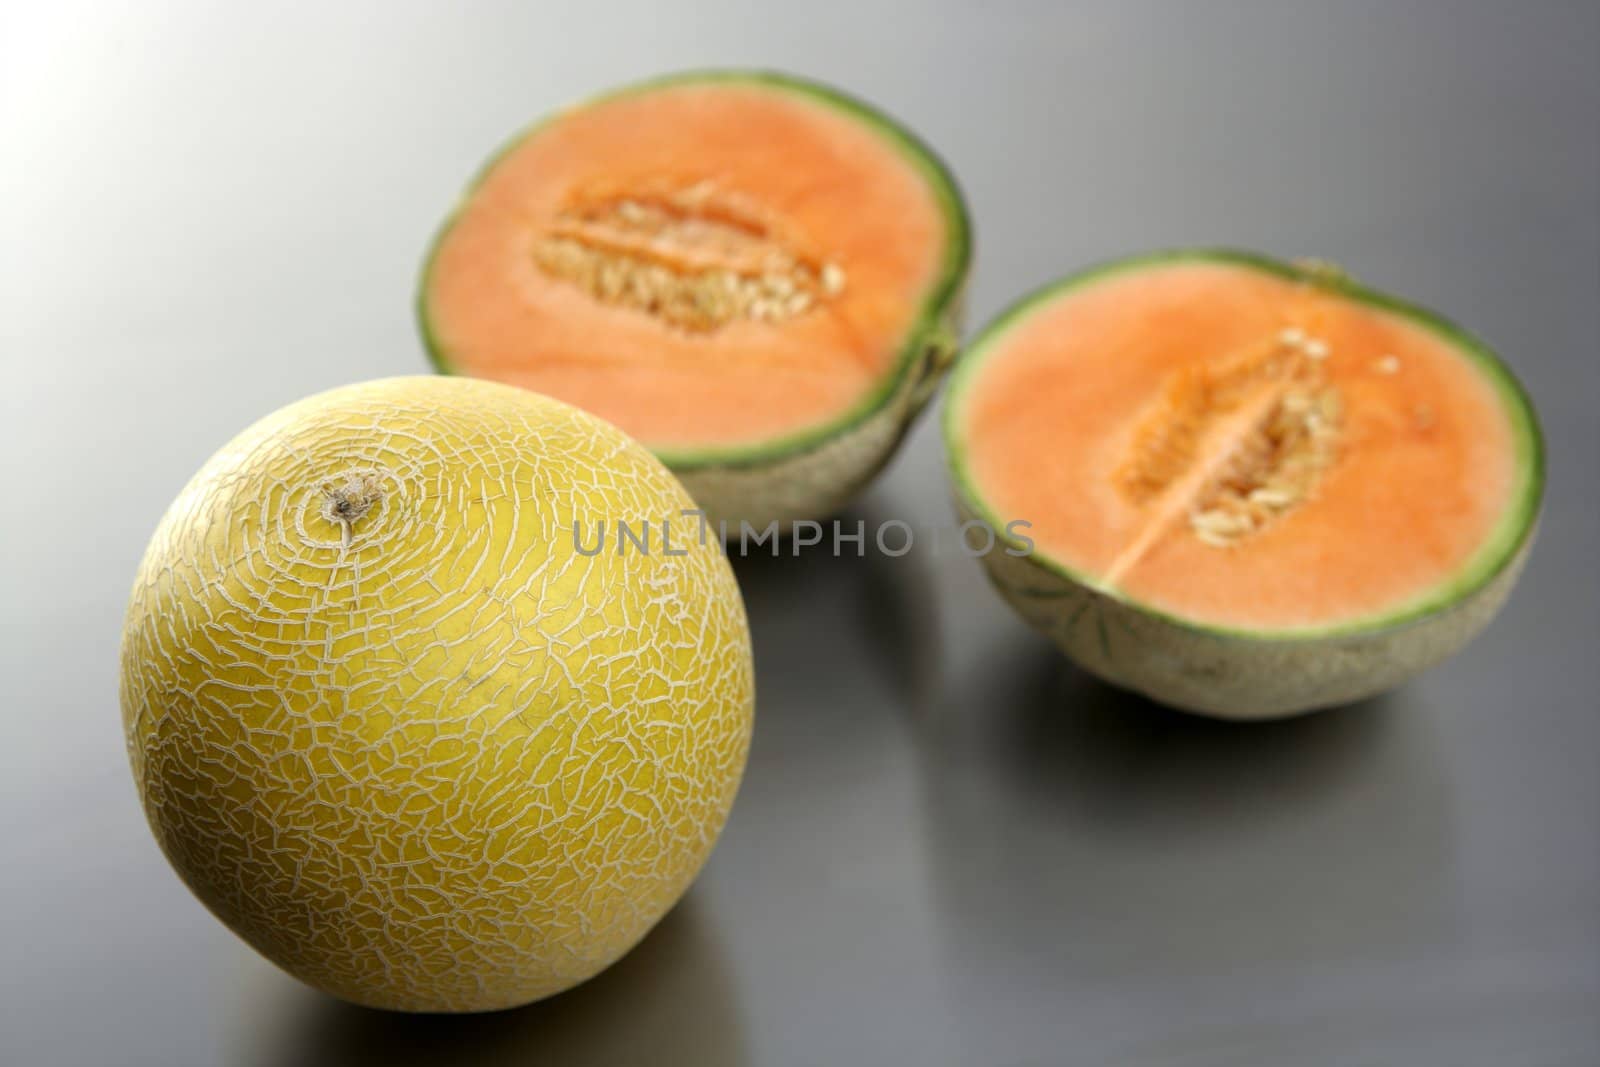 Two melon fruit over a stainless steel table